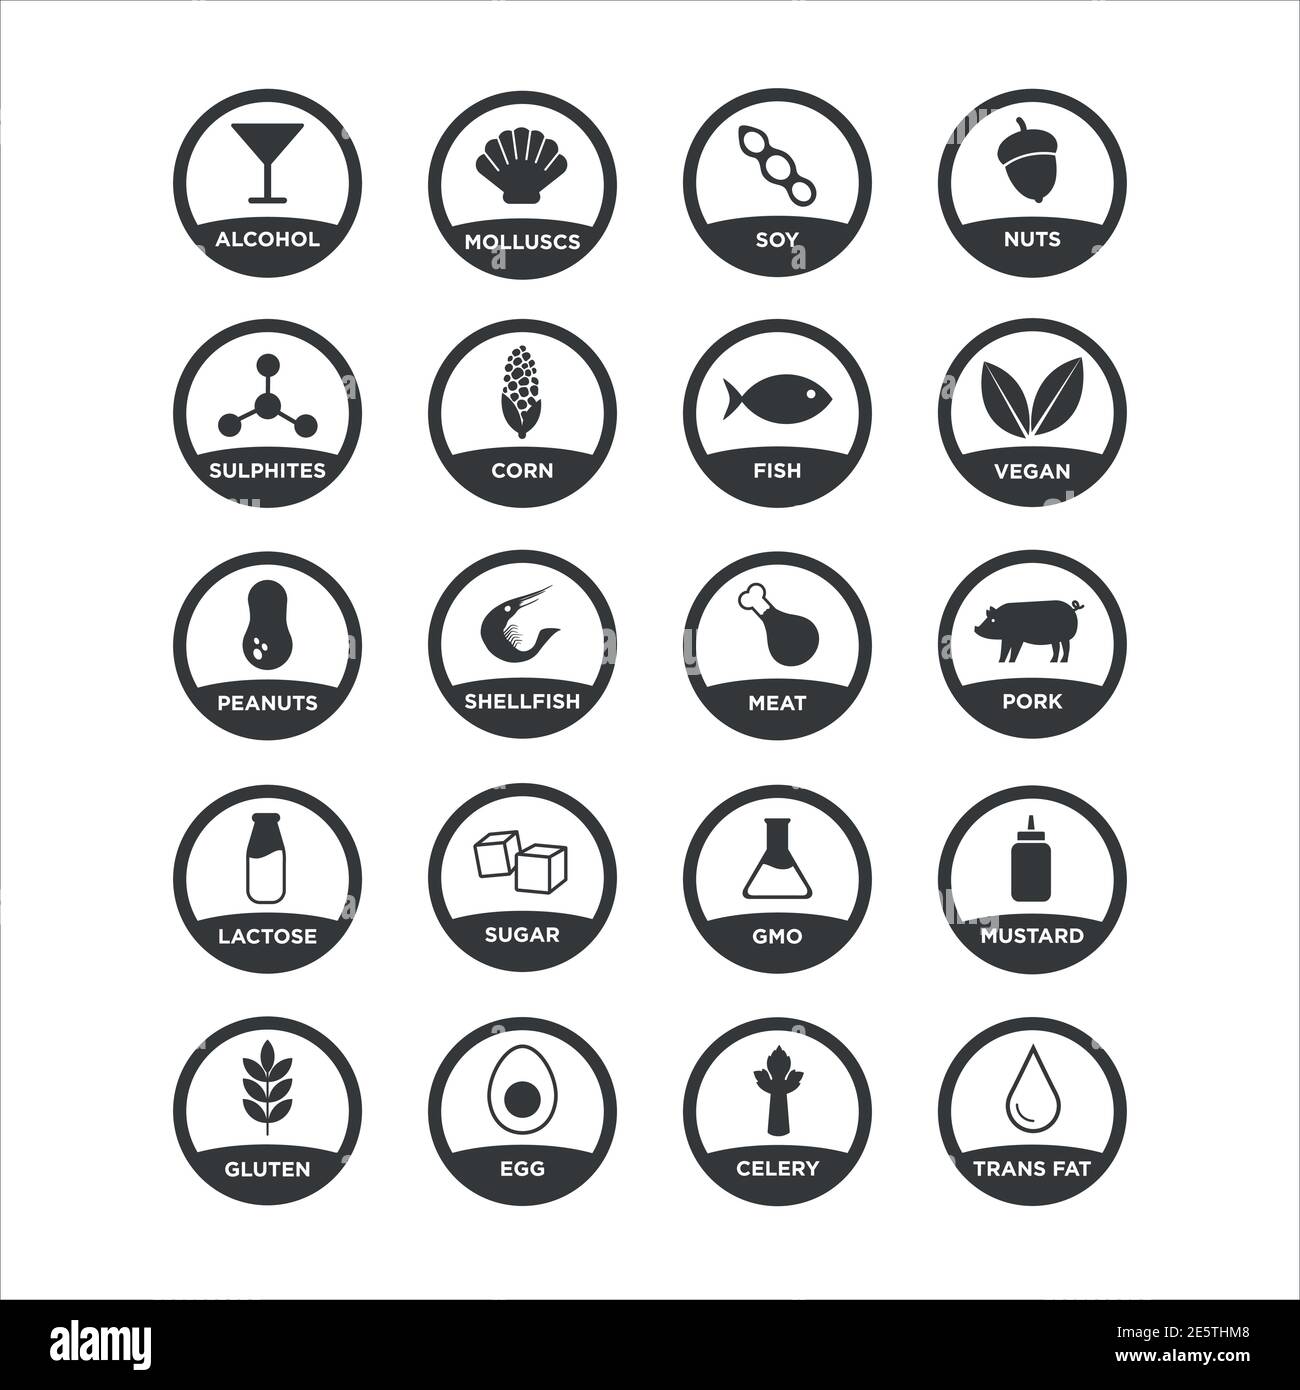 Allergen food icons set. Black and white. Vector illustration for restaurant menus and food products. Stock Vector